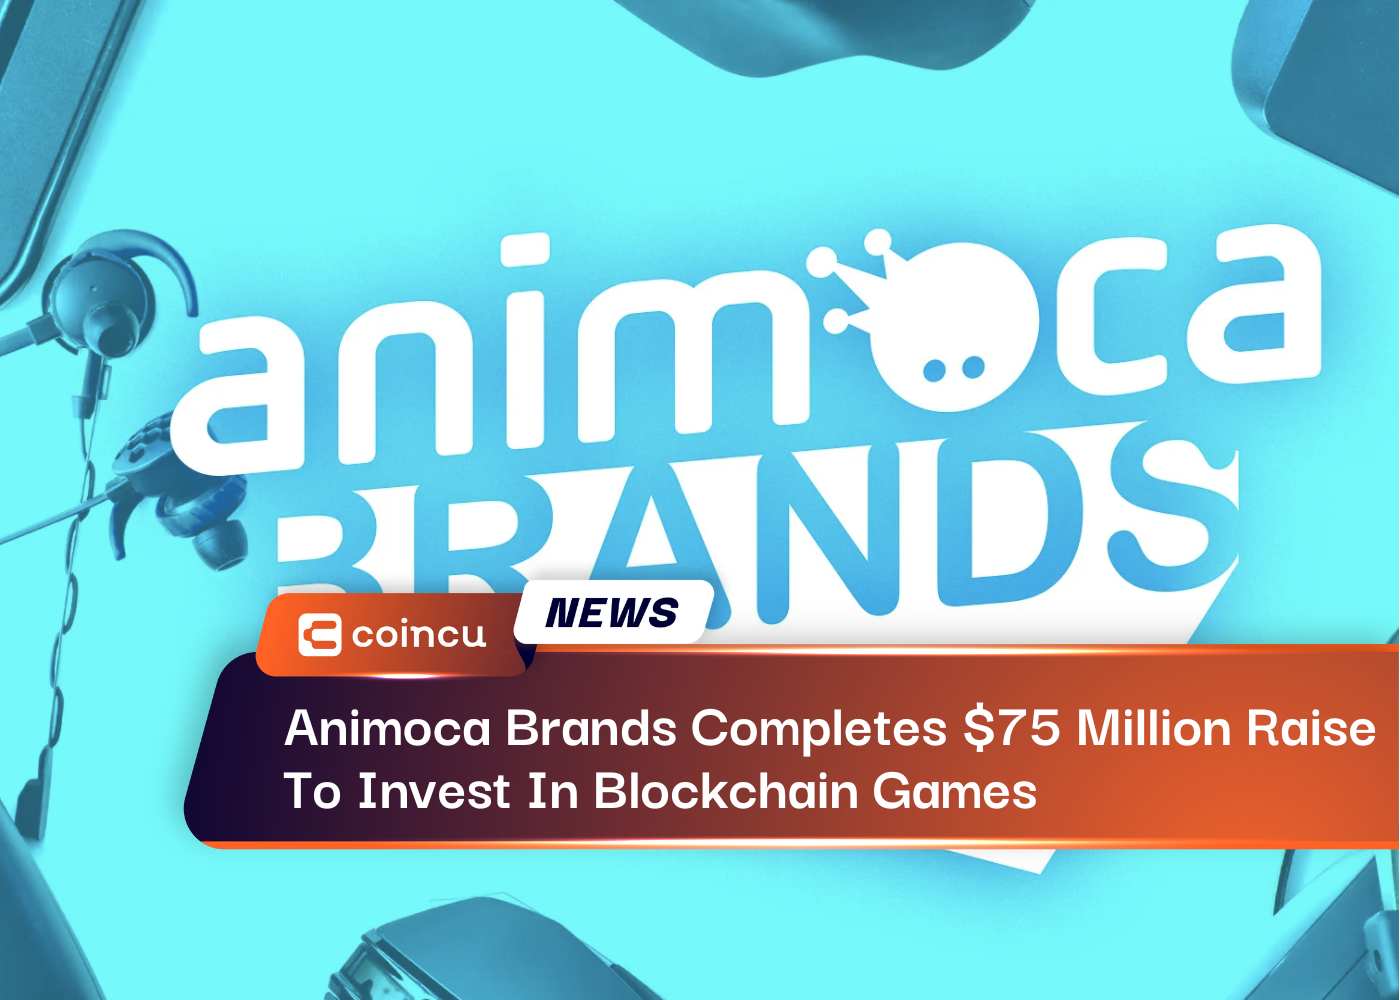 Animoca Brands Completes $75 Million Raise To Invest In Blockchain Games